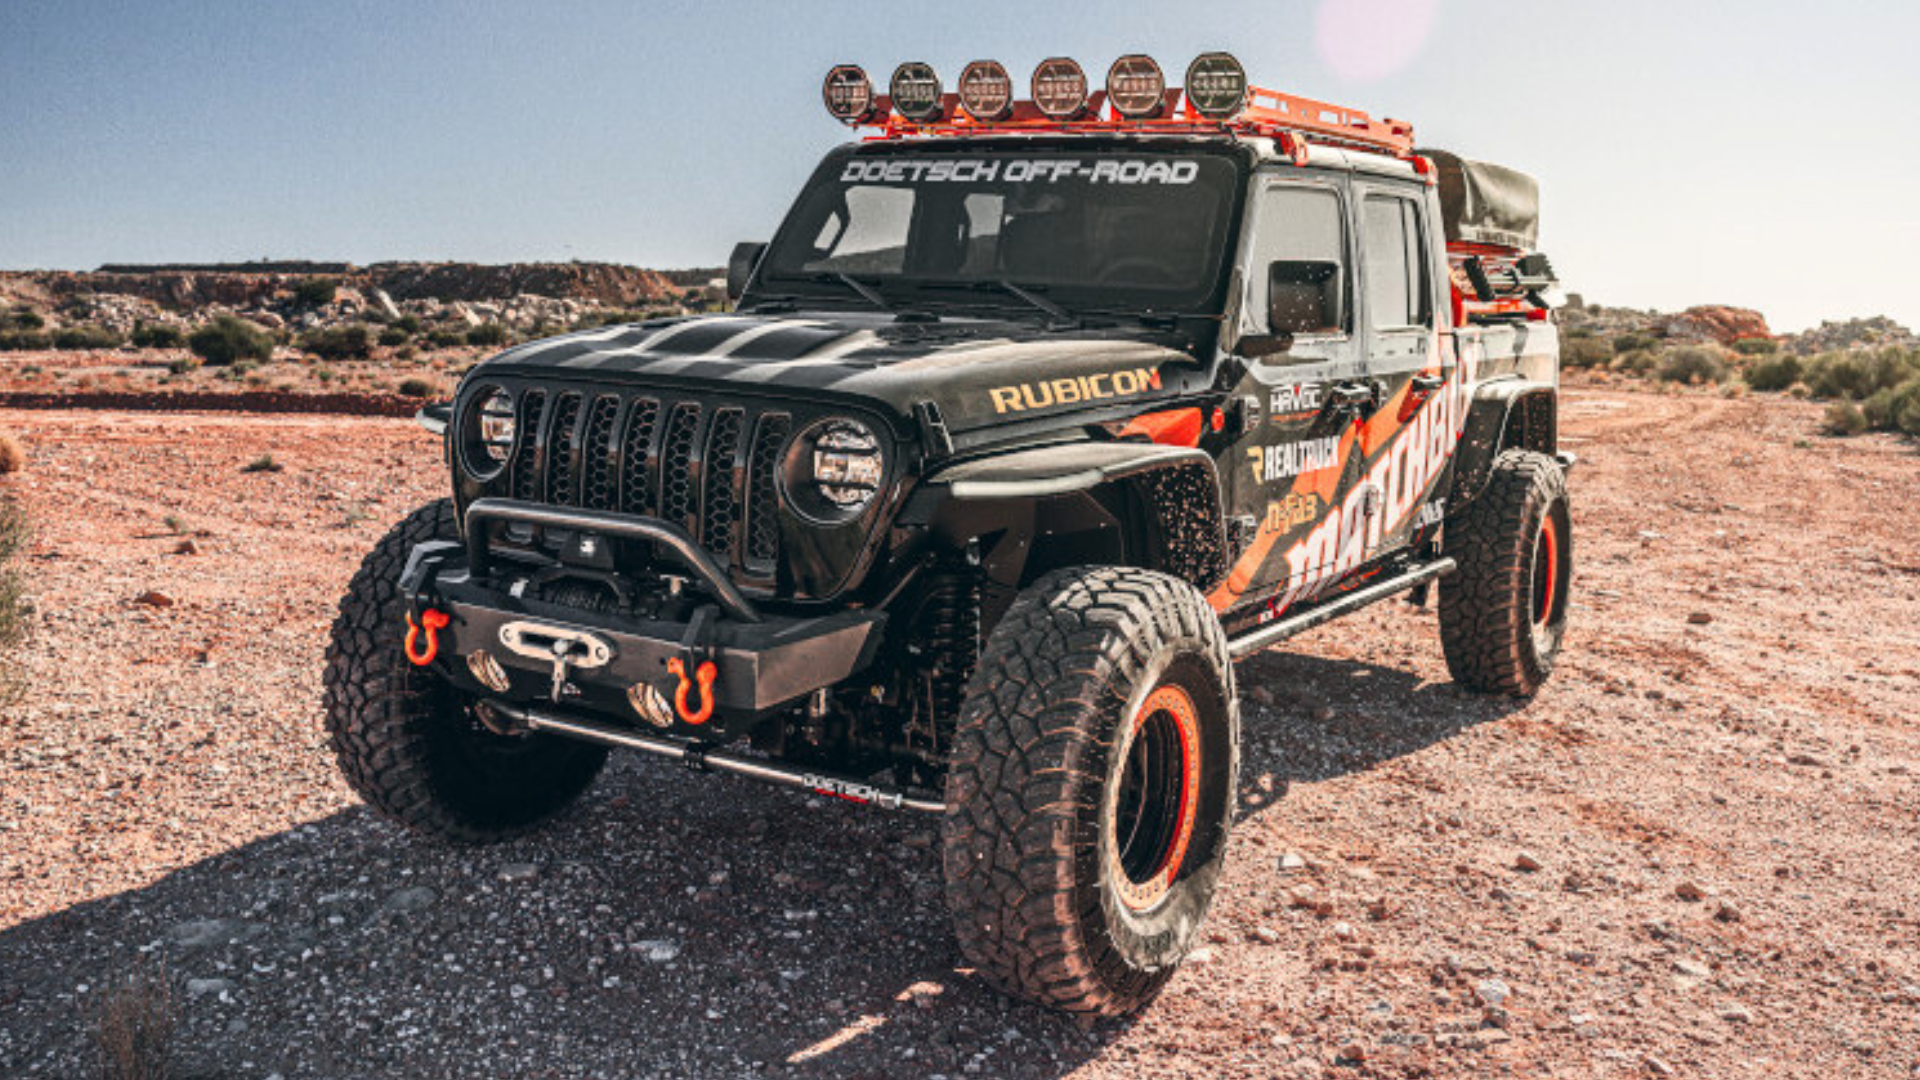 This Life-Size Jeep Gladiator Matchbox Is Your Childhood Dream Come True